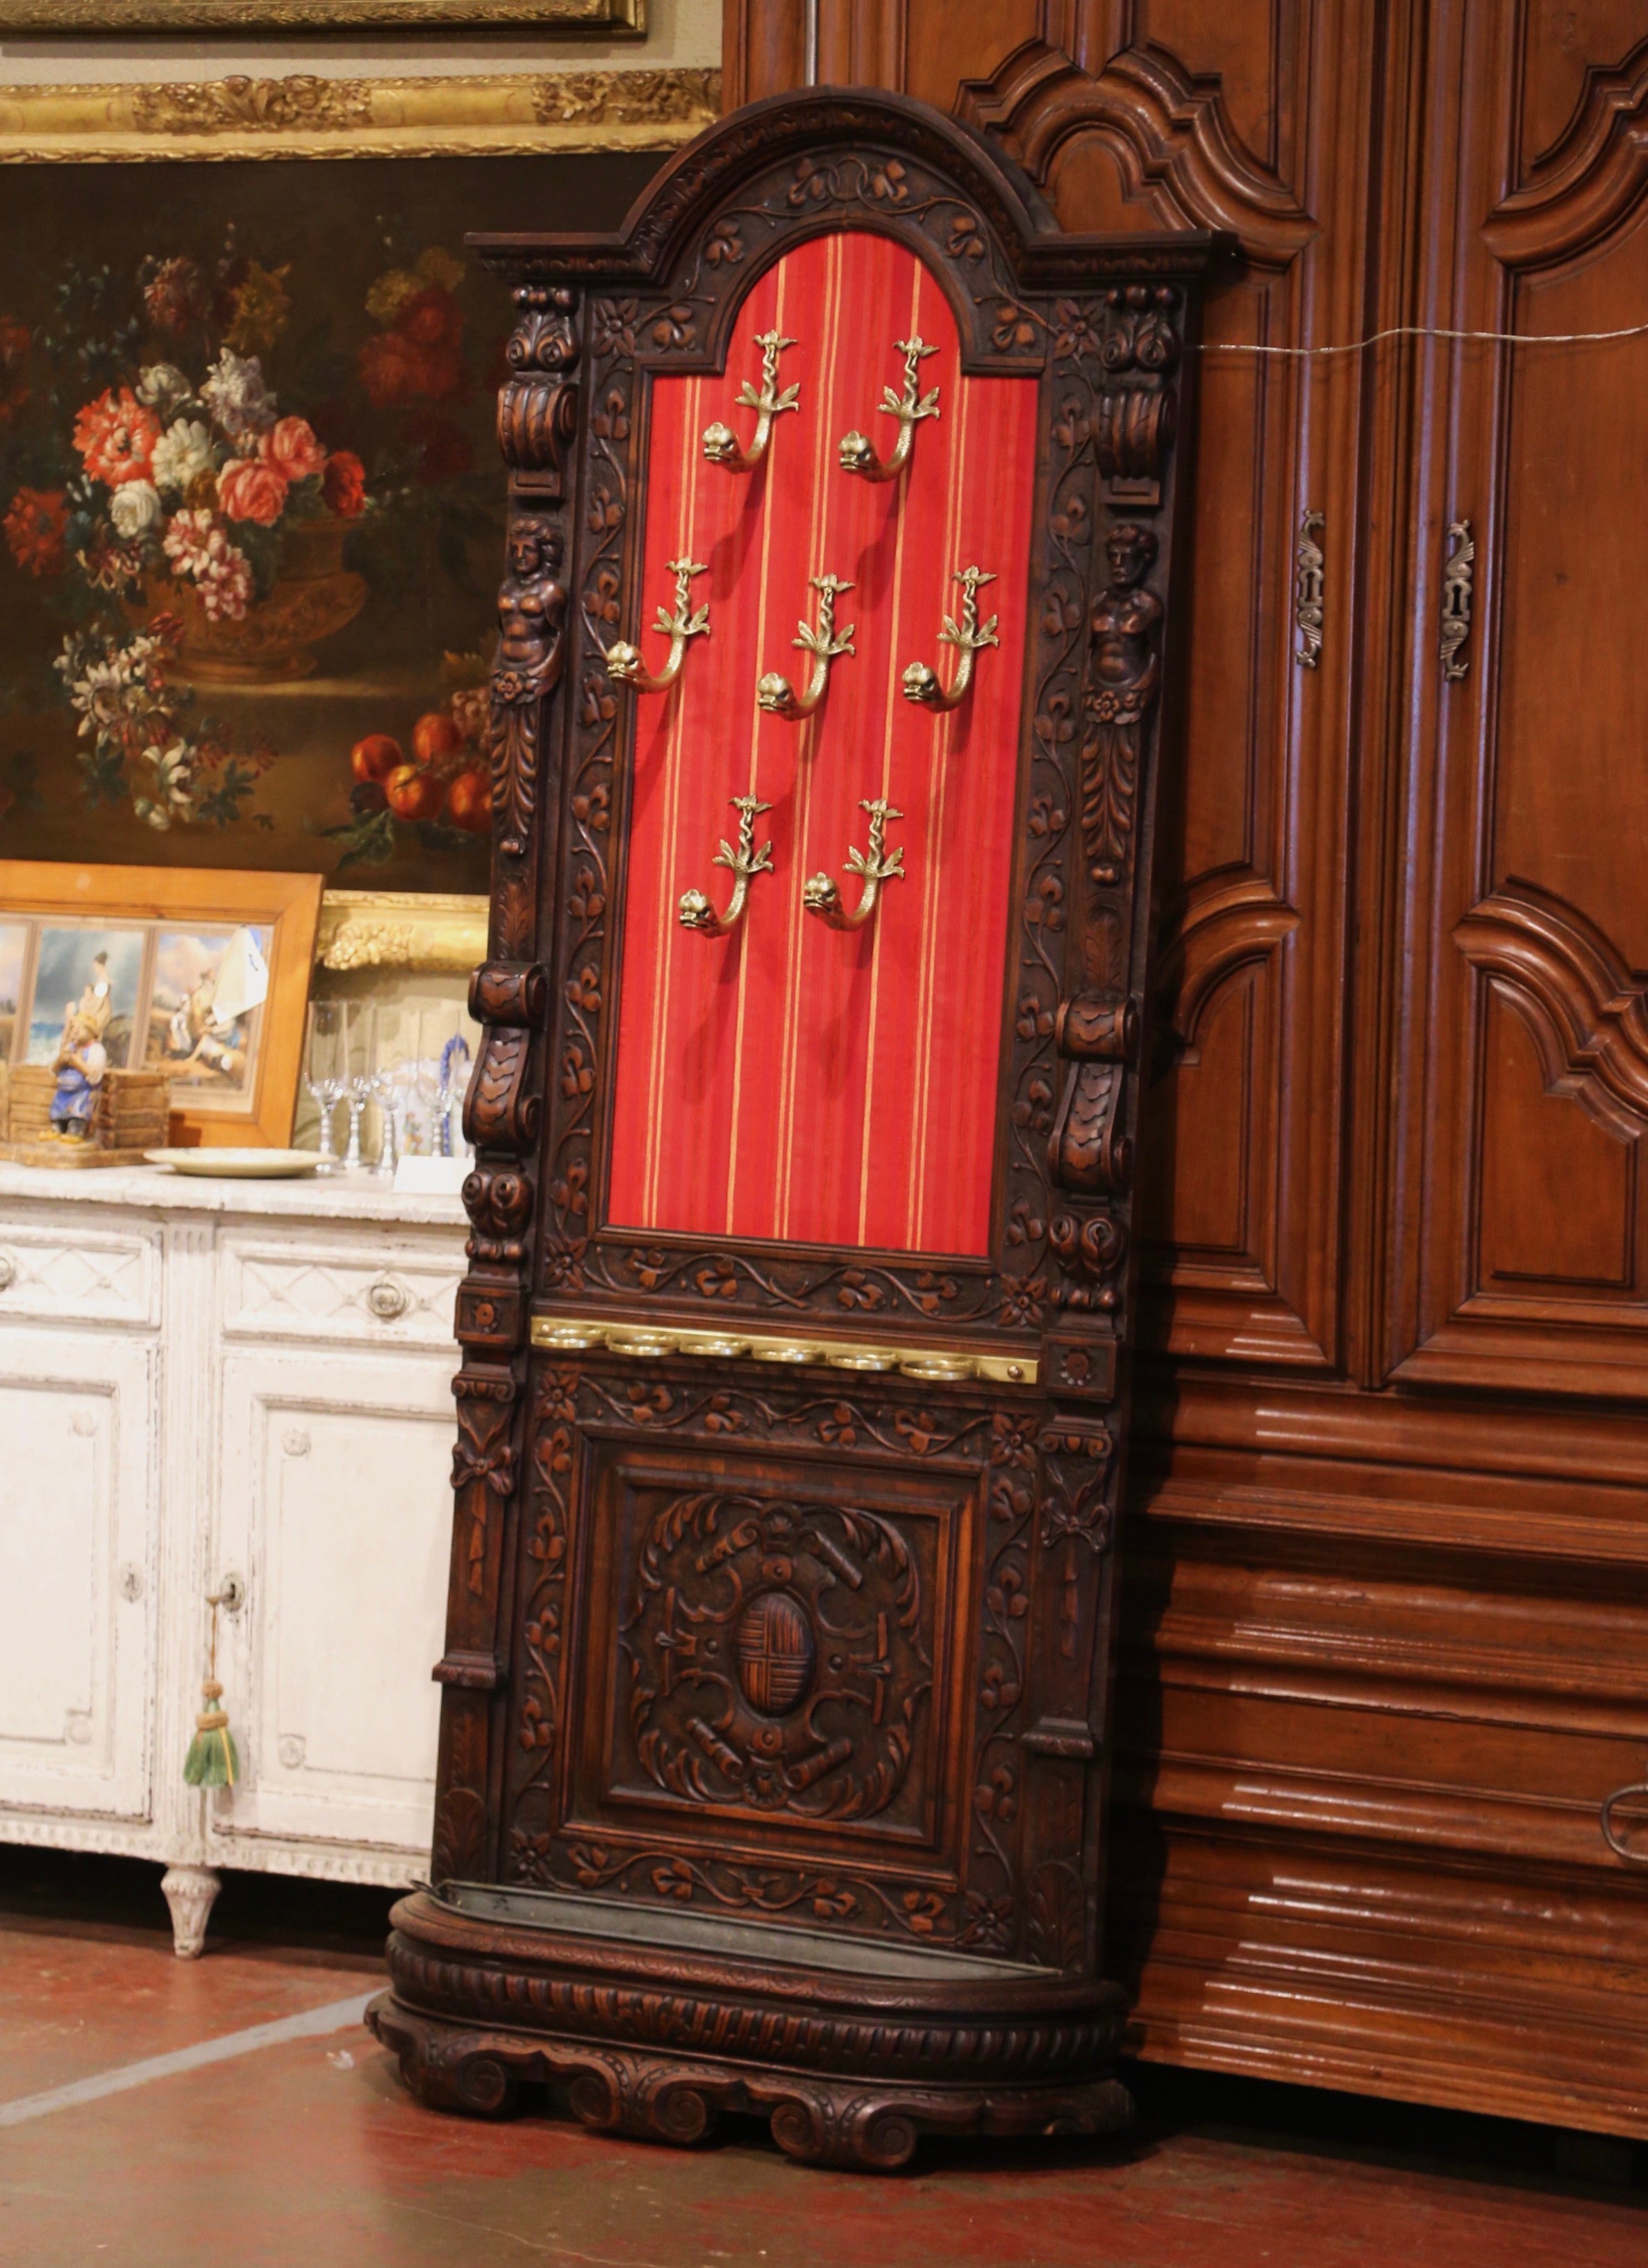 This elegant antique Gothic coat rack was crafted in southern France, circa 1880. The symmetrical stand features an arched bonnet top with molded cornice, embellished with floral motifs. The paneled backboard is accented with male and female